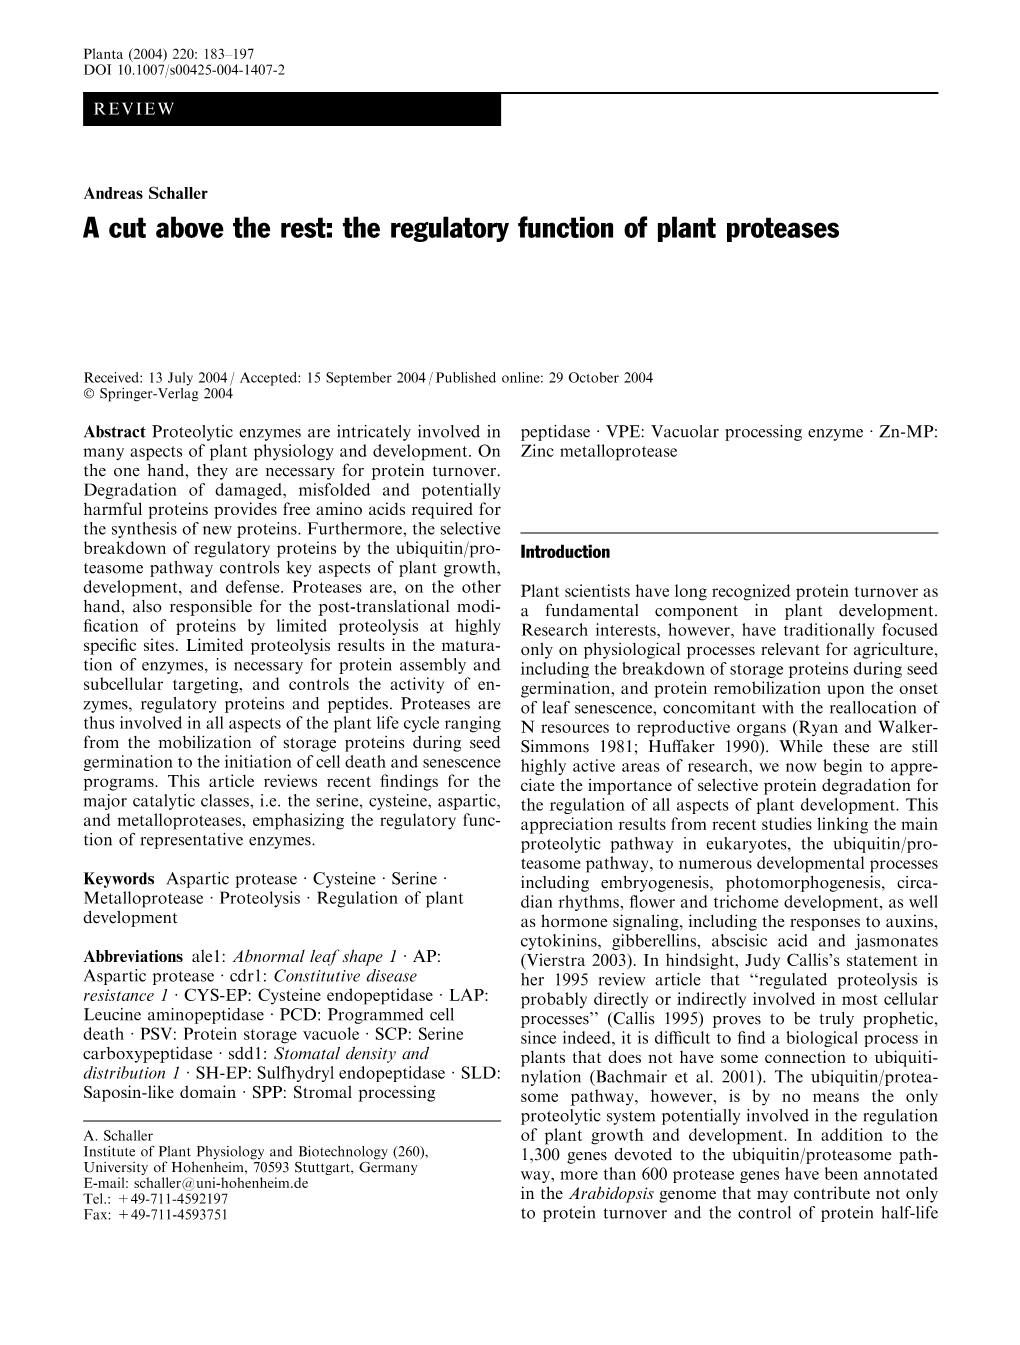 A Cut Above the Rest: the Regulatory Function of Plant Proteases